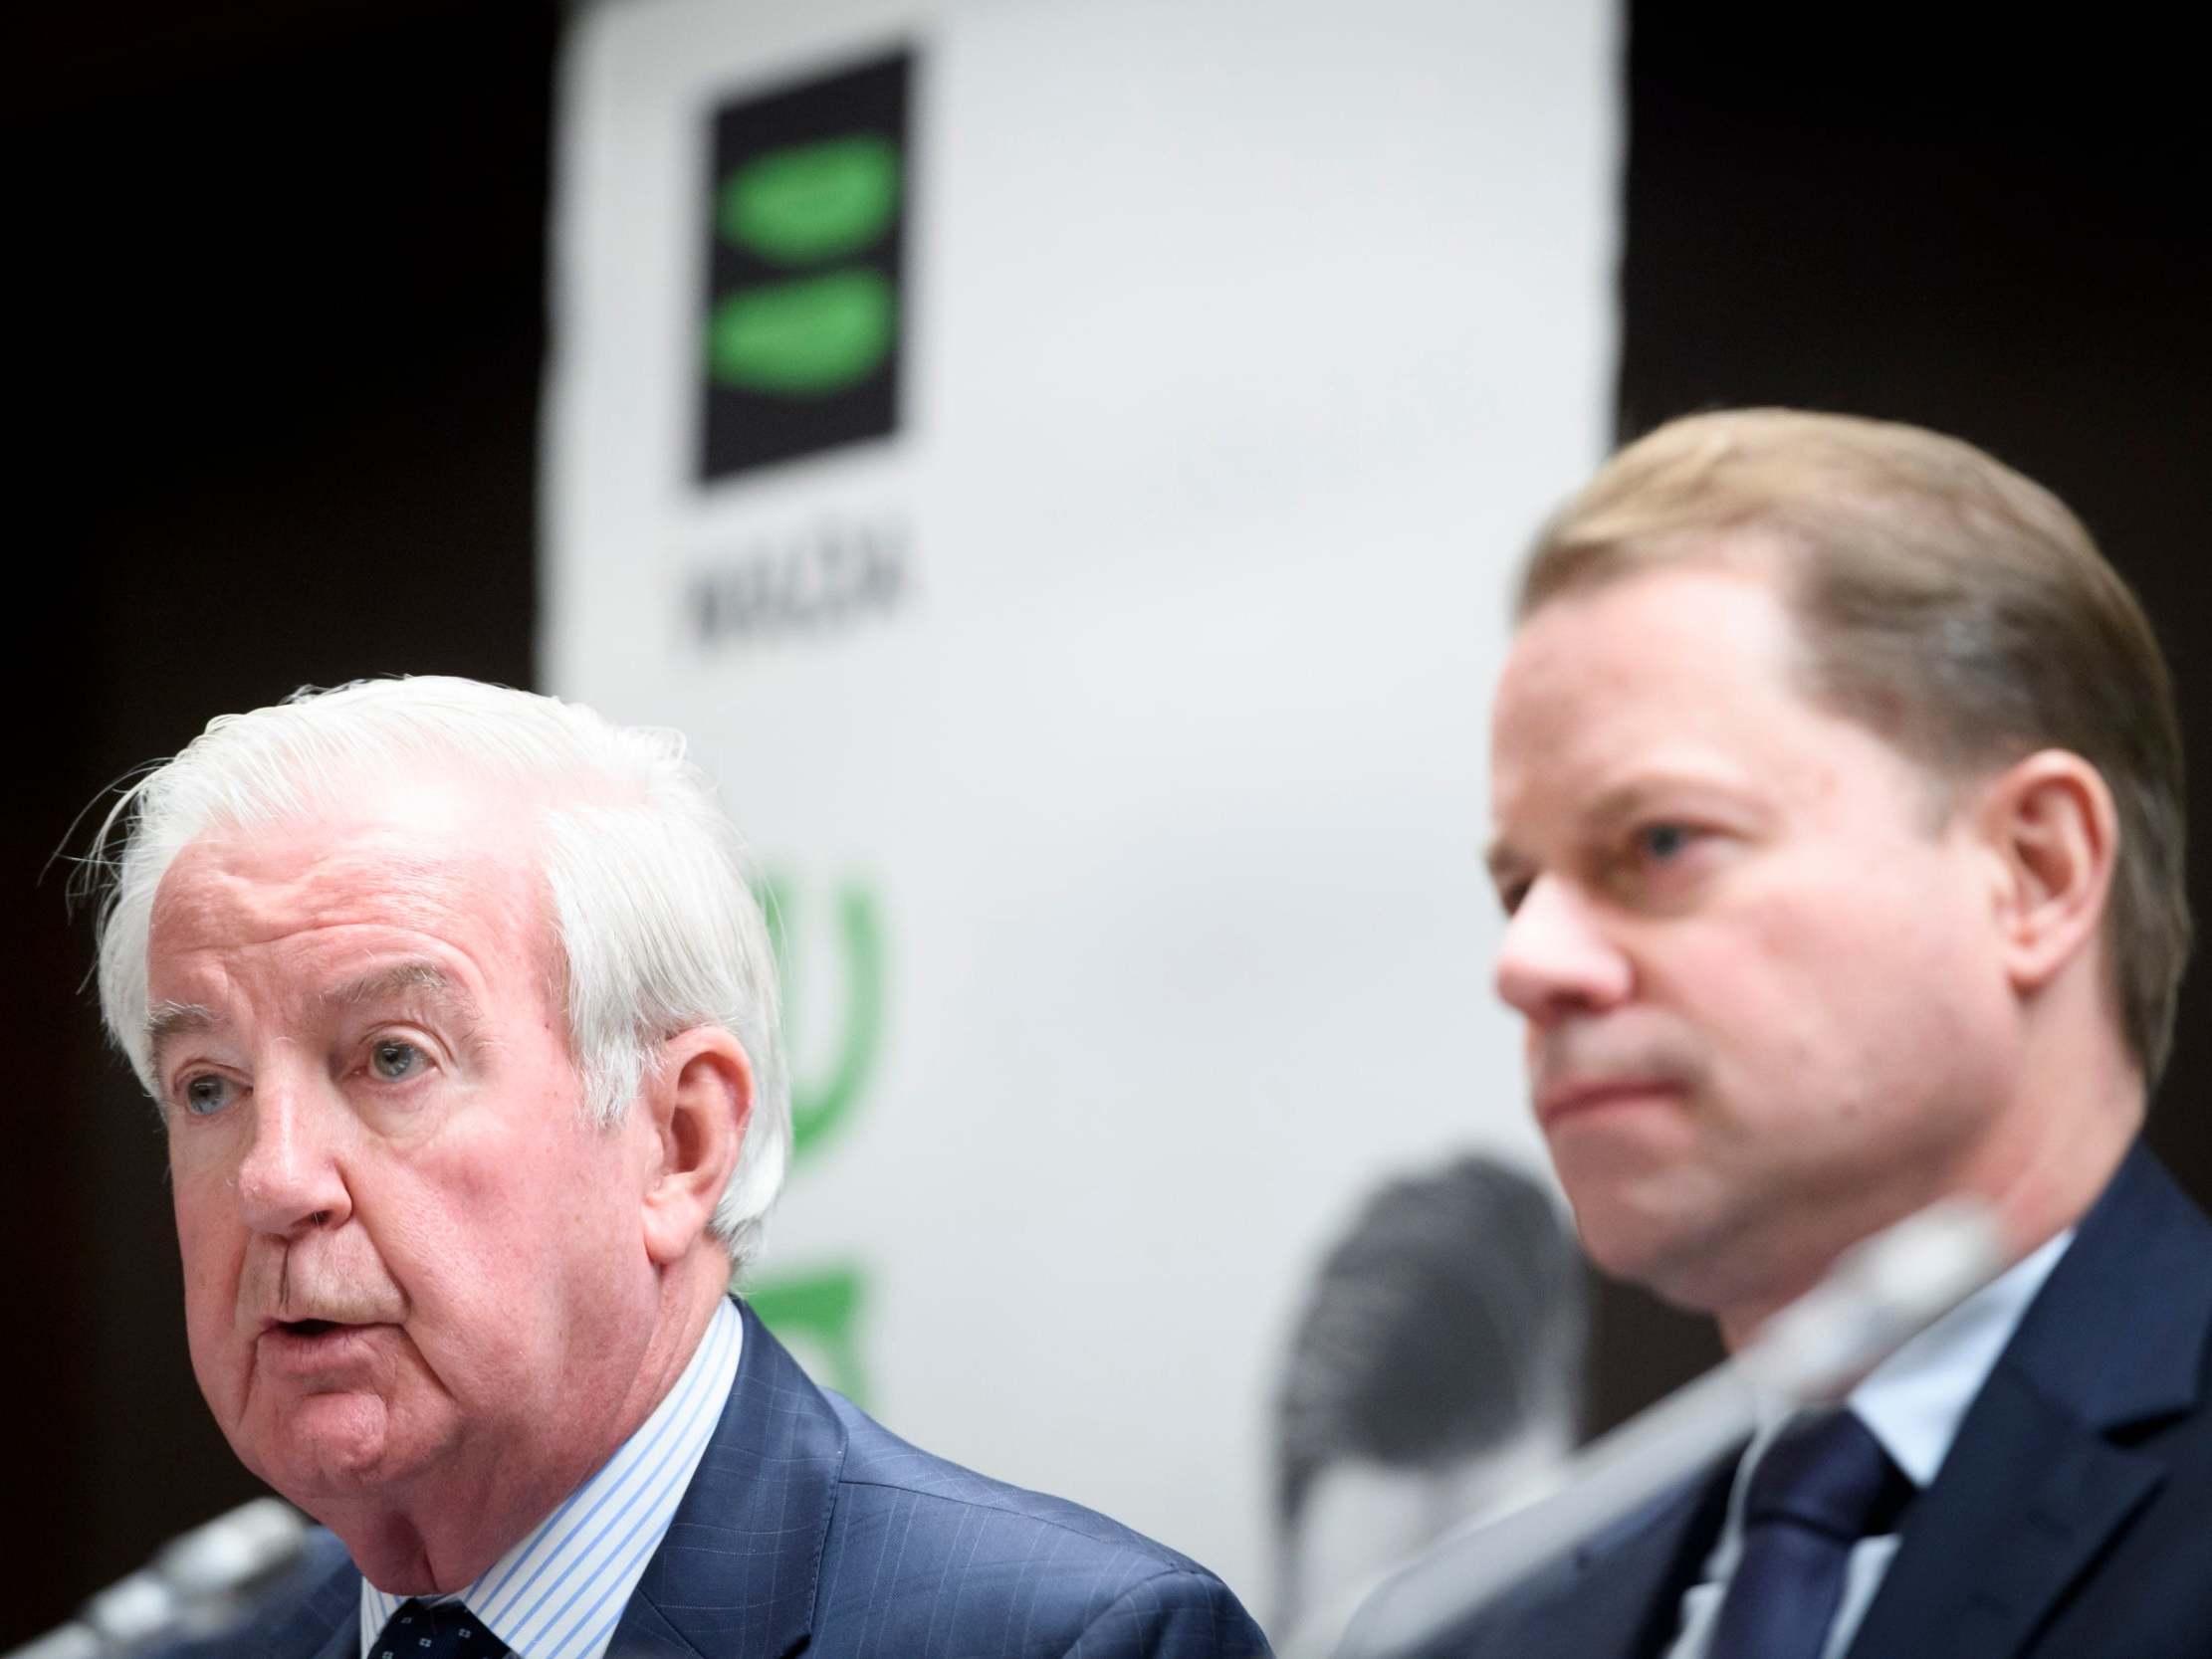 Wada president Craig Reedie, left, and director general Olivier Niggli speak during a press conference announcing Russia's ban